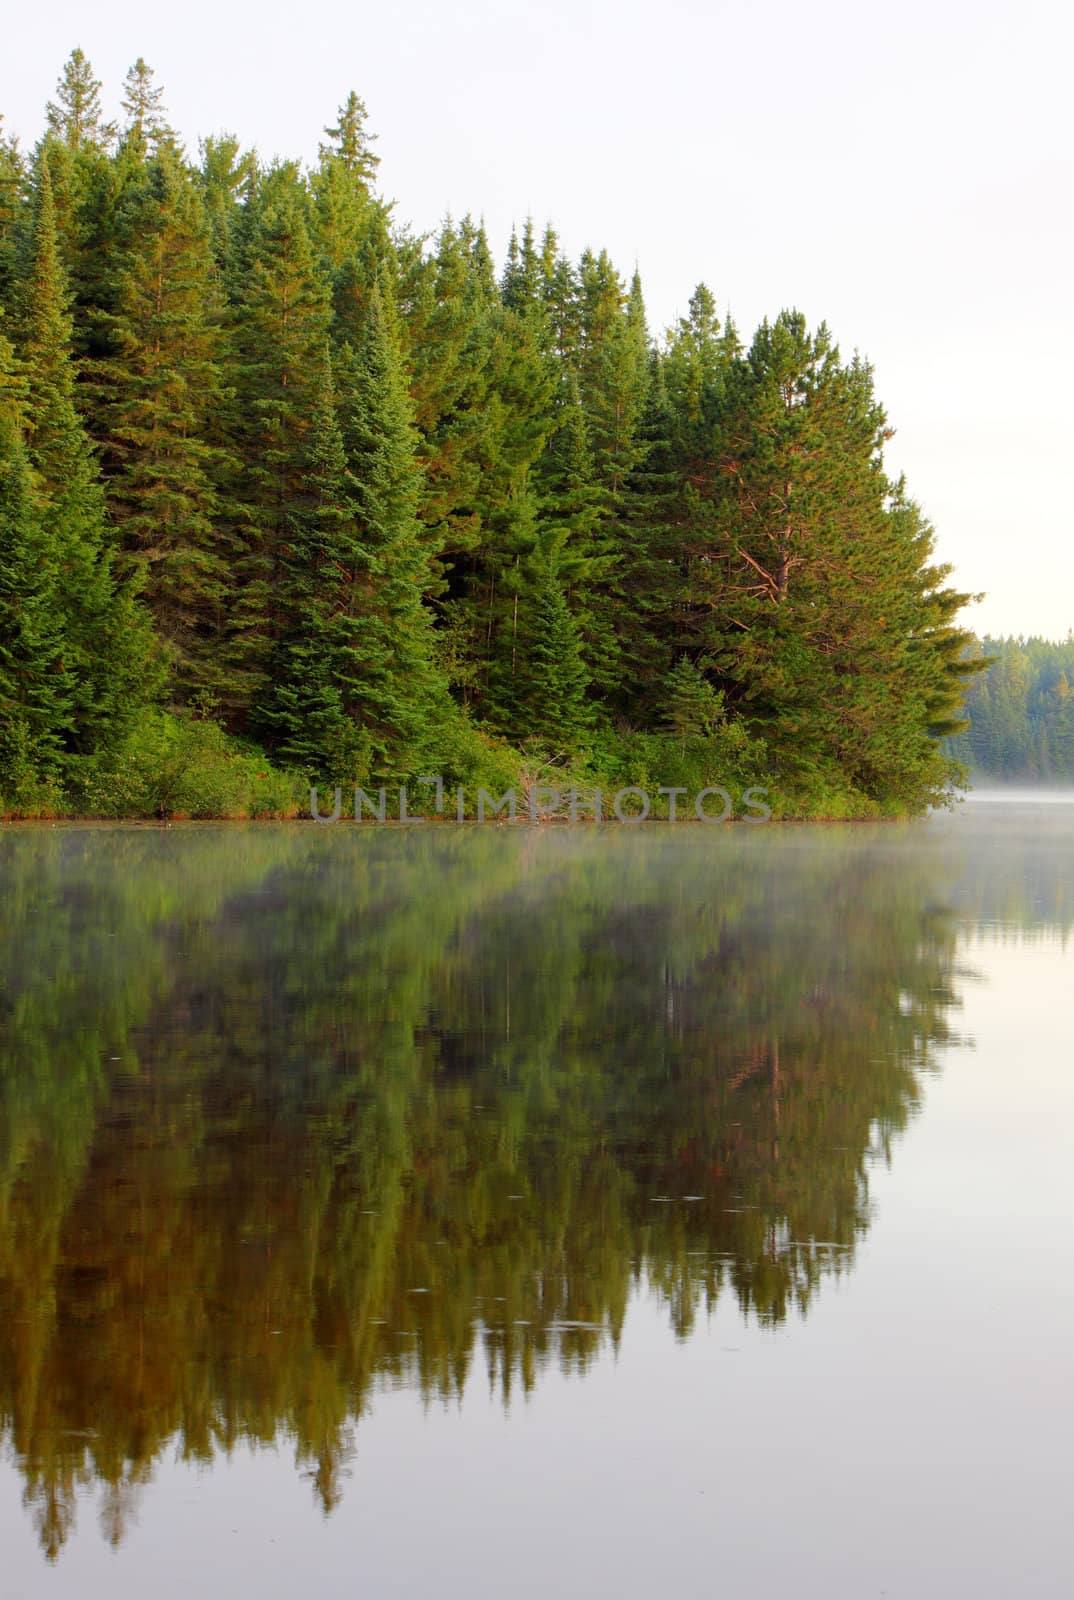 The reflection of evergreen trees in Pog Lake, in Algonquin Park, Ontario, Canada.